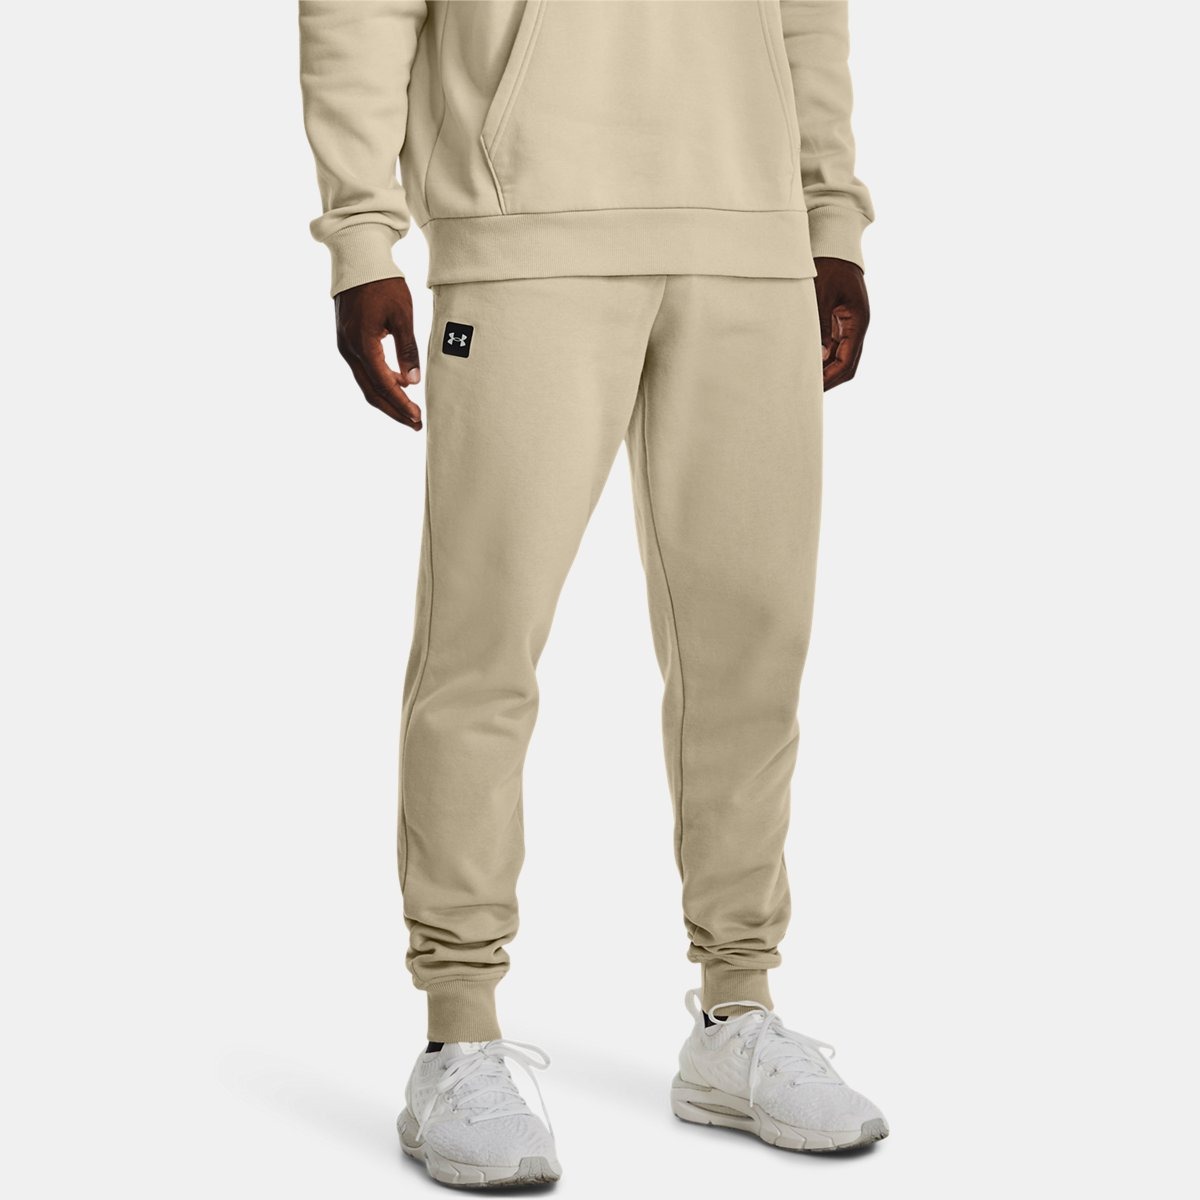 Under Armour - Brown Gent Joggers GOOFASH